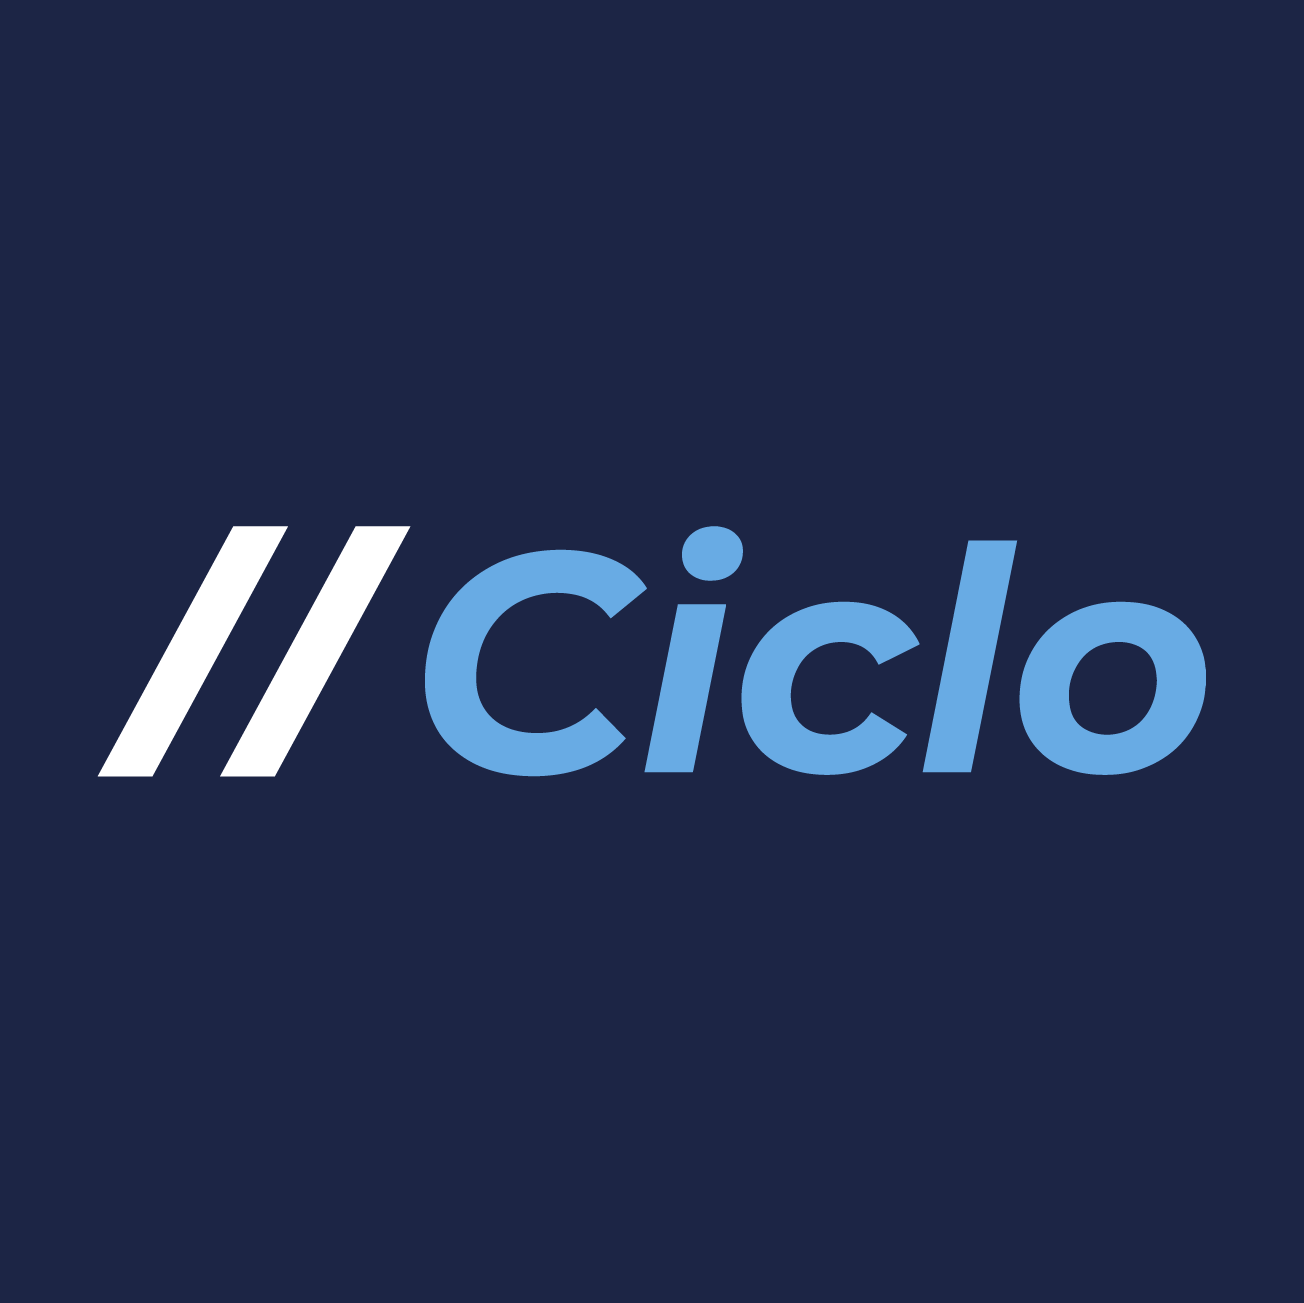 Club Image for CICLO